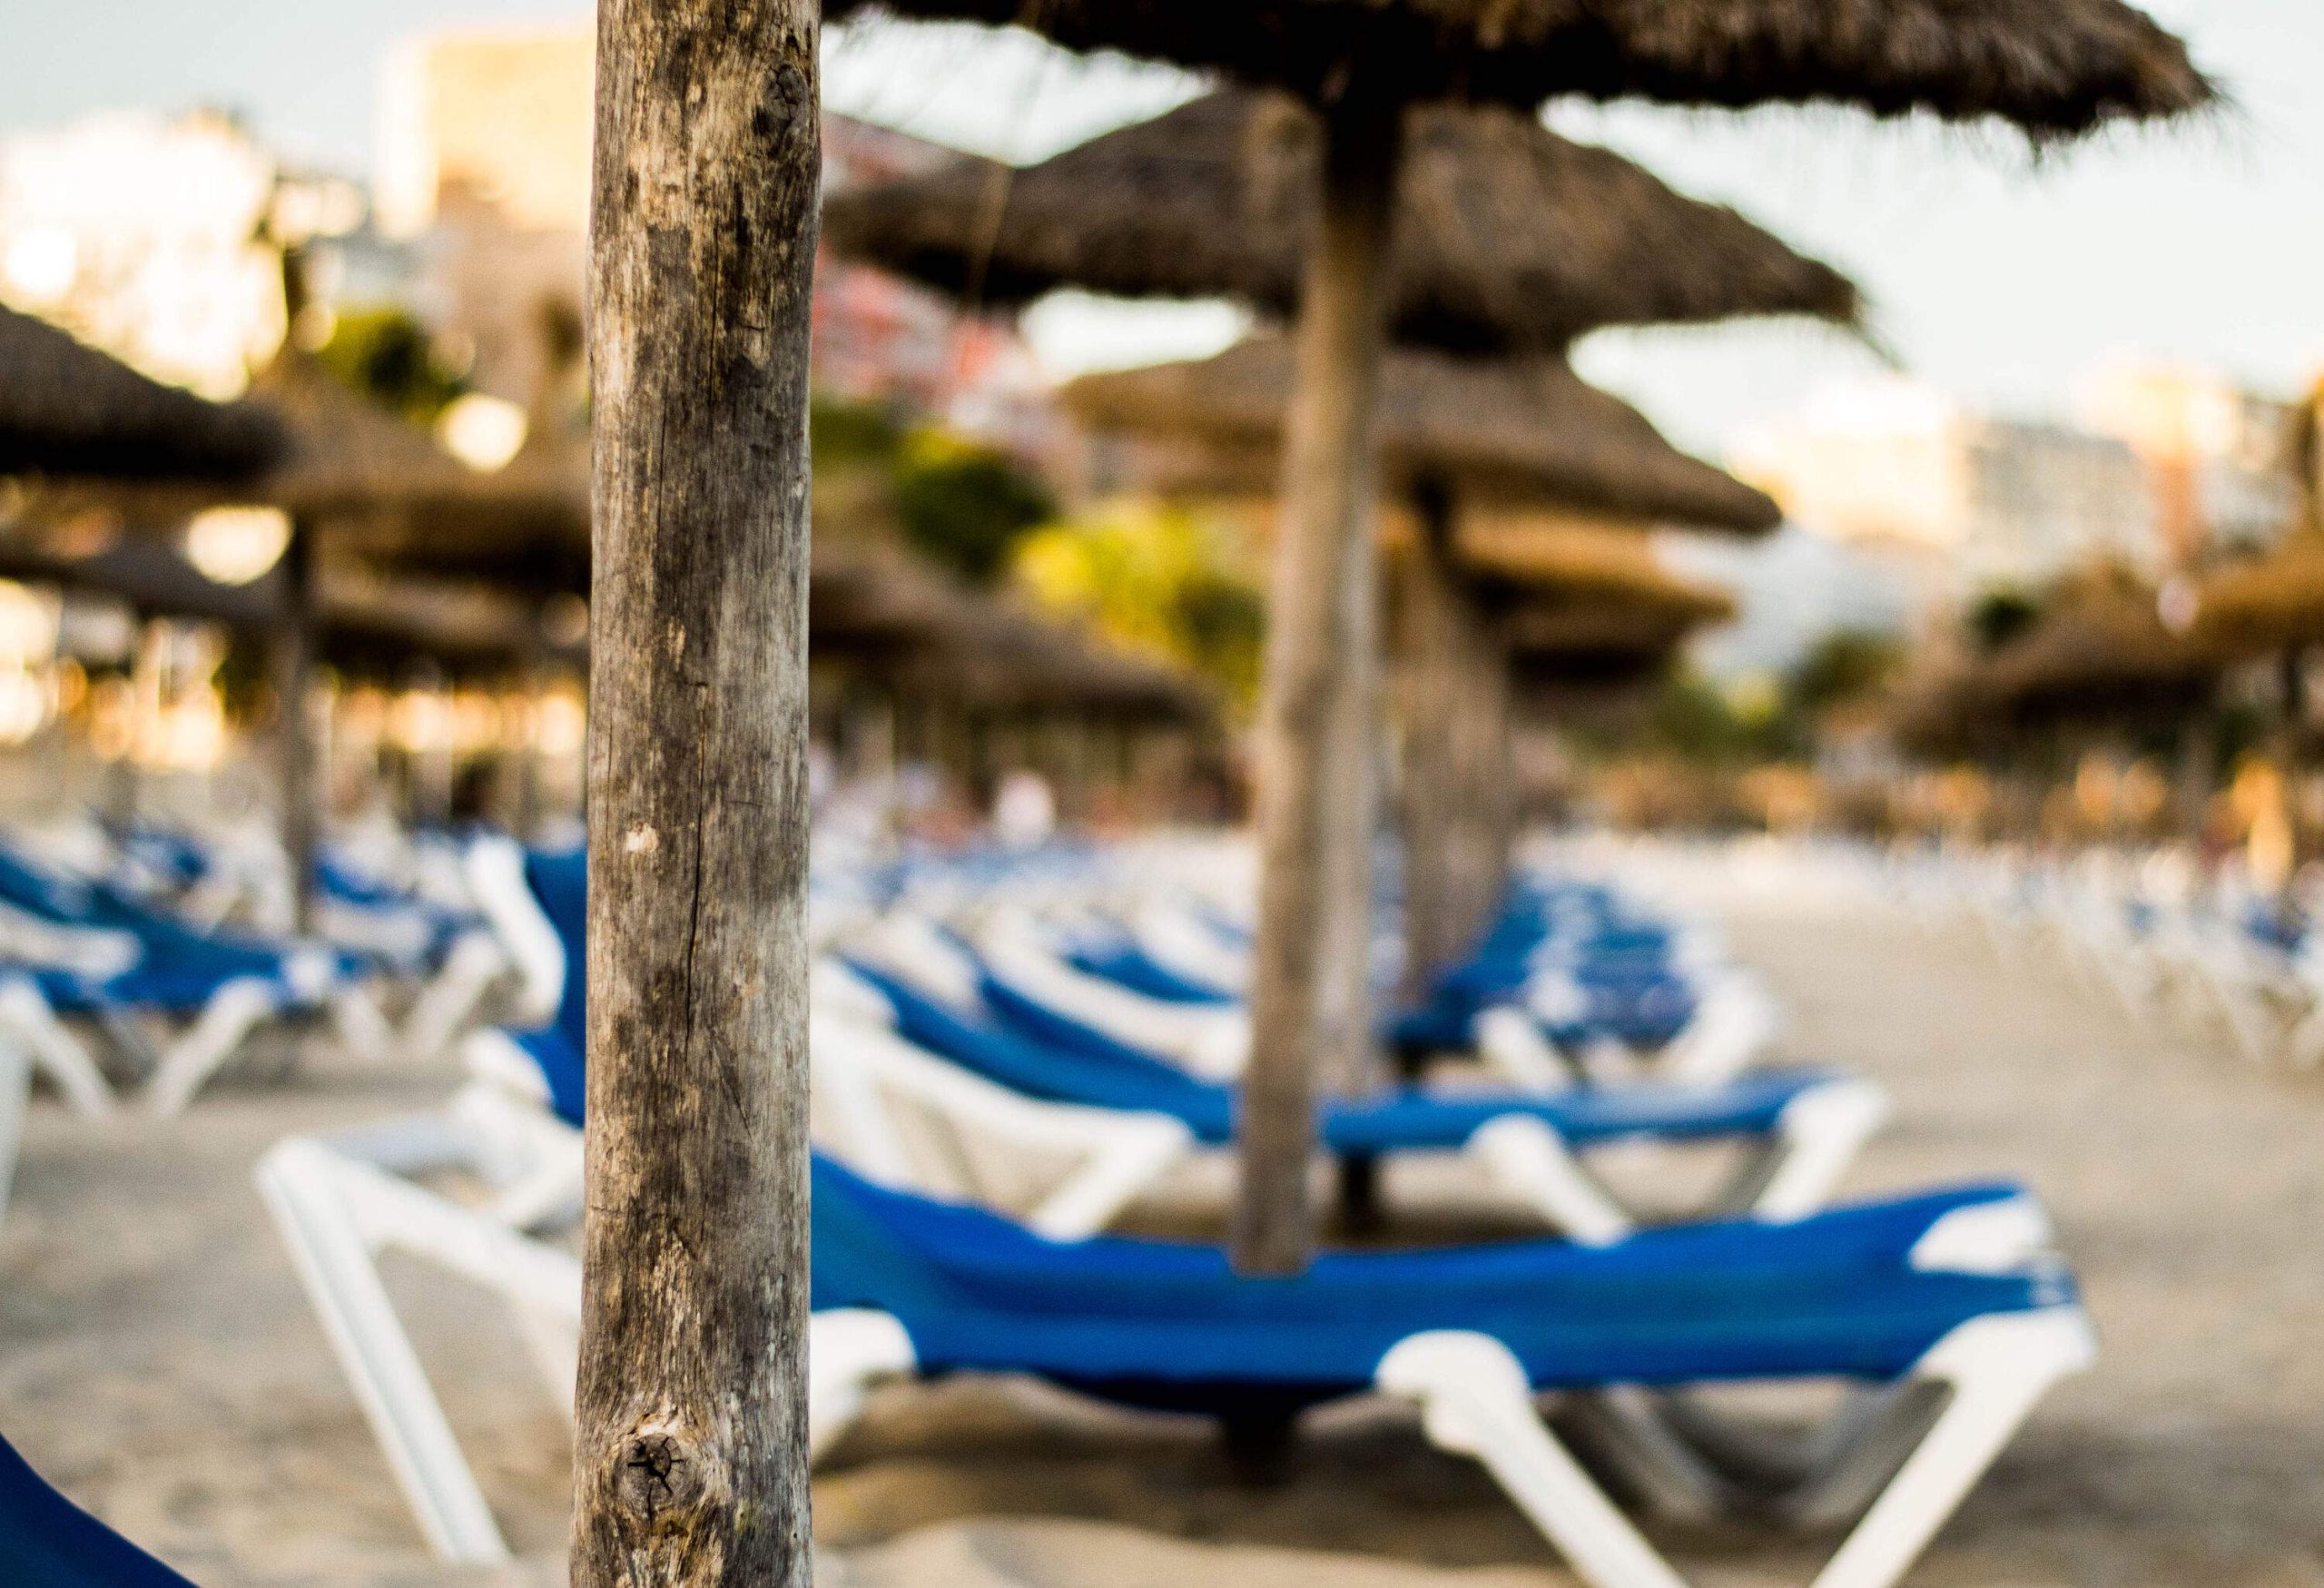 Bokeh of rows of blue beach chairs and umbrellas on the shore of the beach.